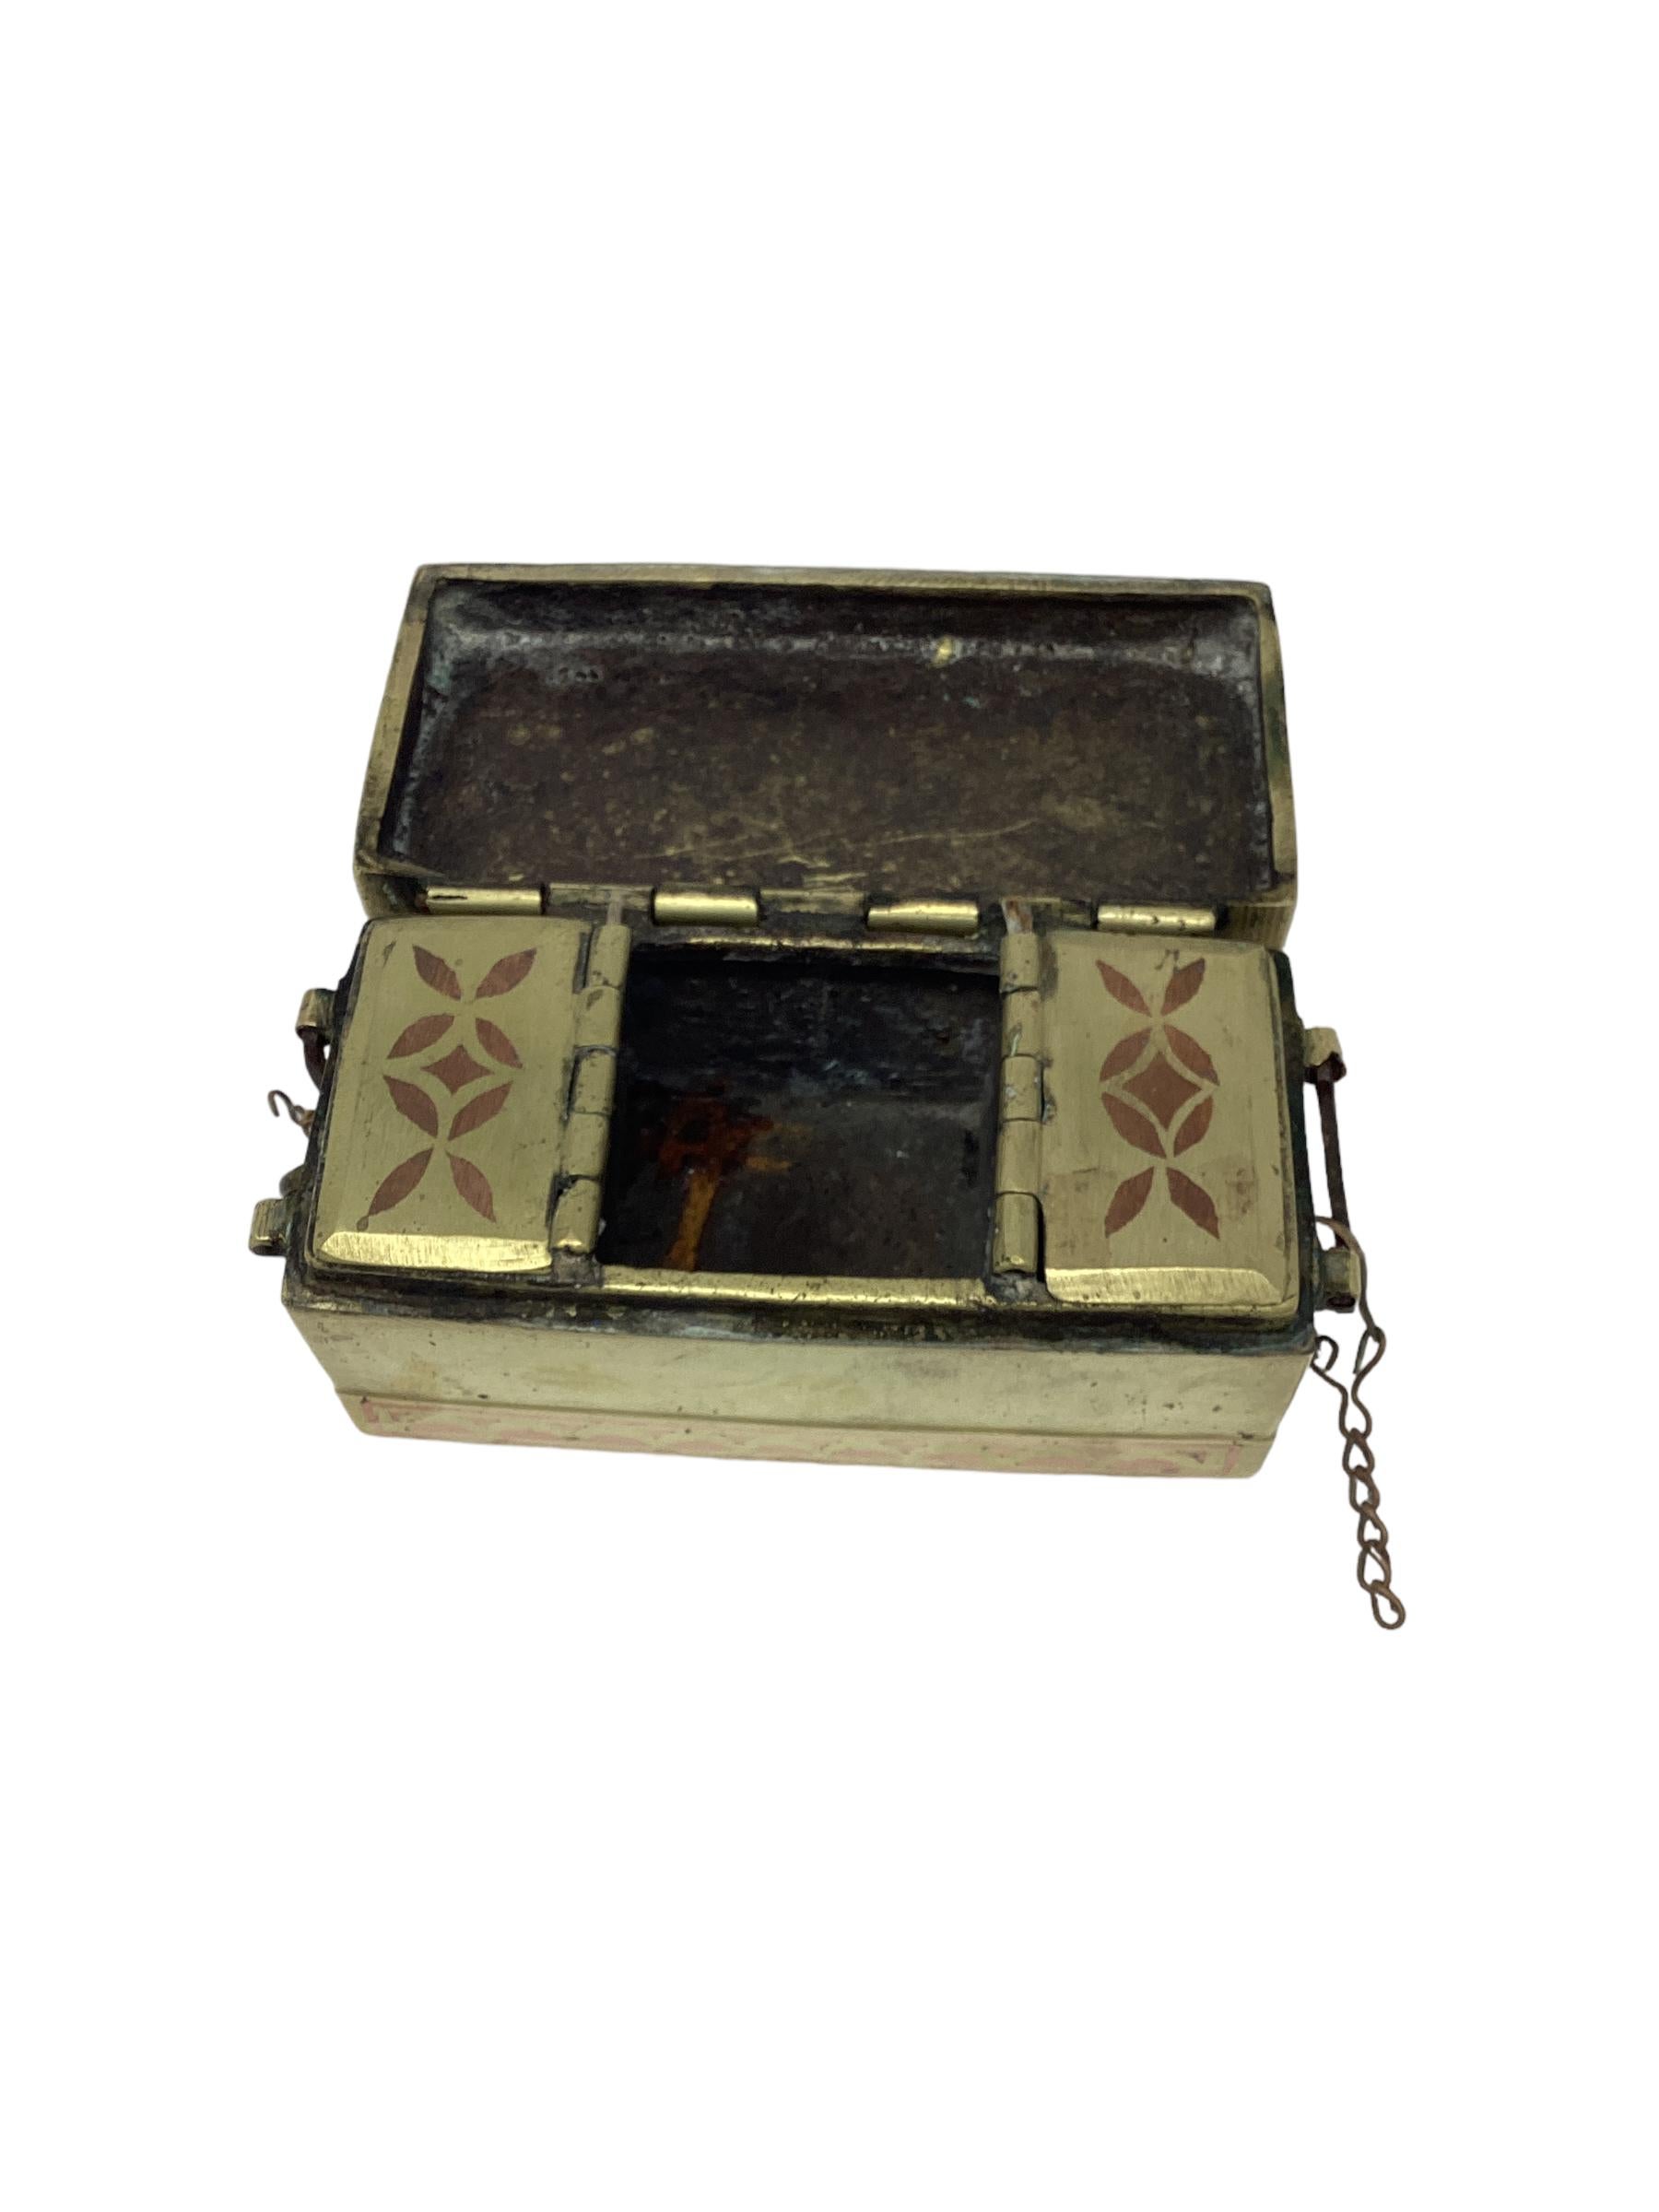 Philippine Antique Brass and Copper Betel Nut Box For Sale